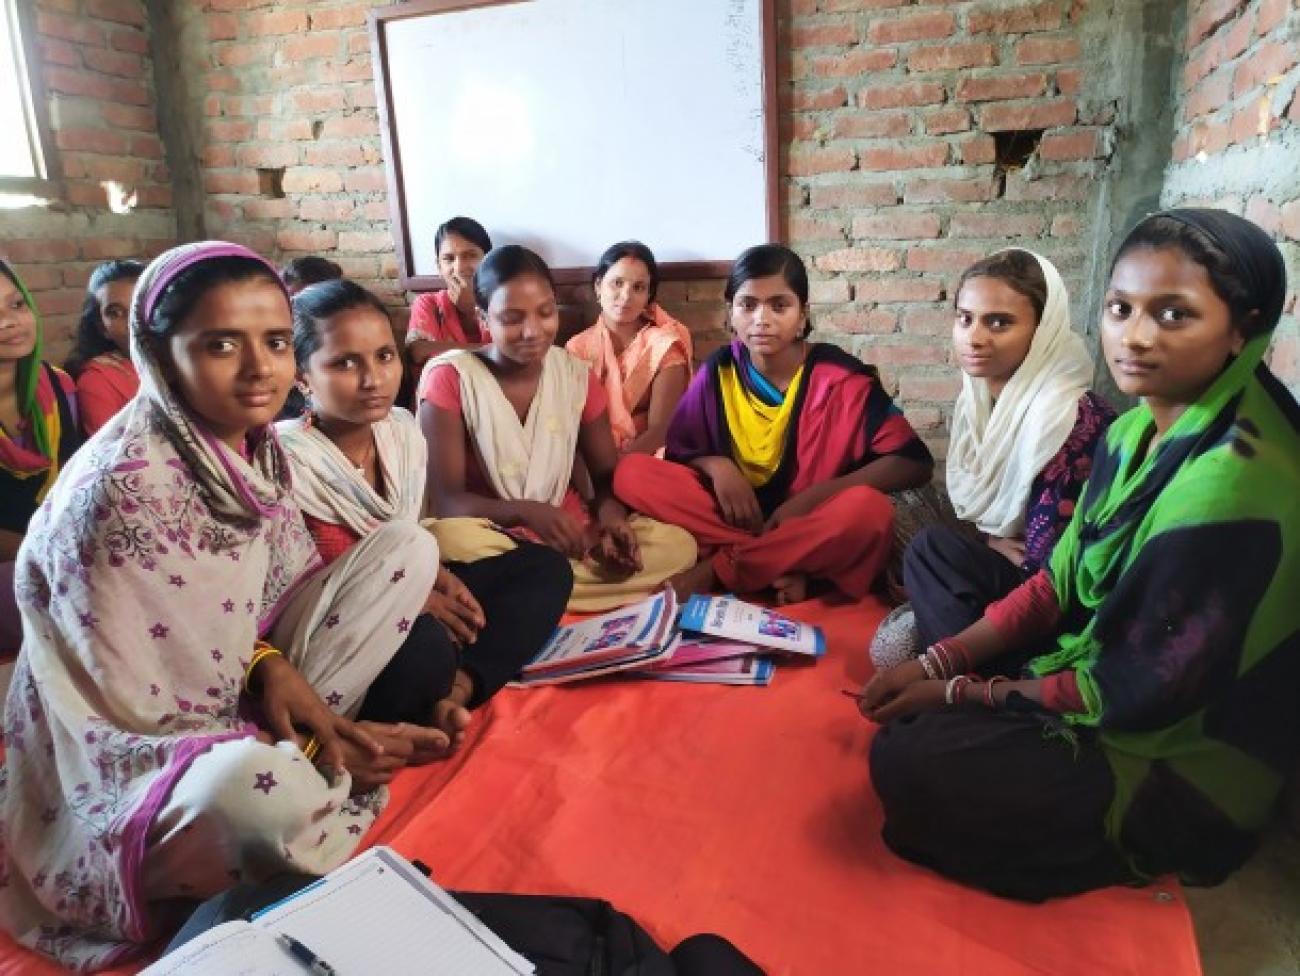 A group of eleven women wearing Kurthas are sitting on a red mattress inside a newly built room. There are notebooks in front of them and a whiteboard behind at the wall.